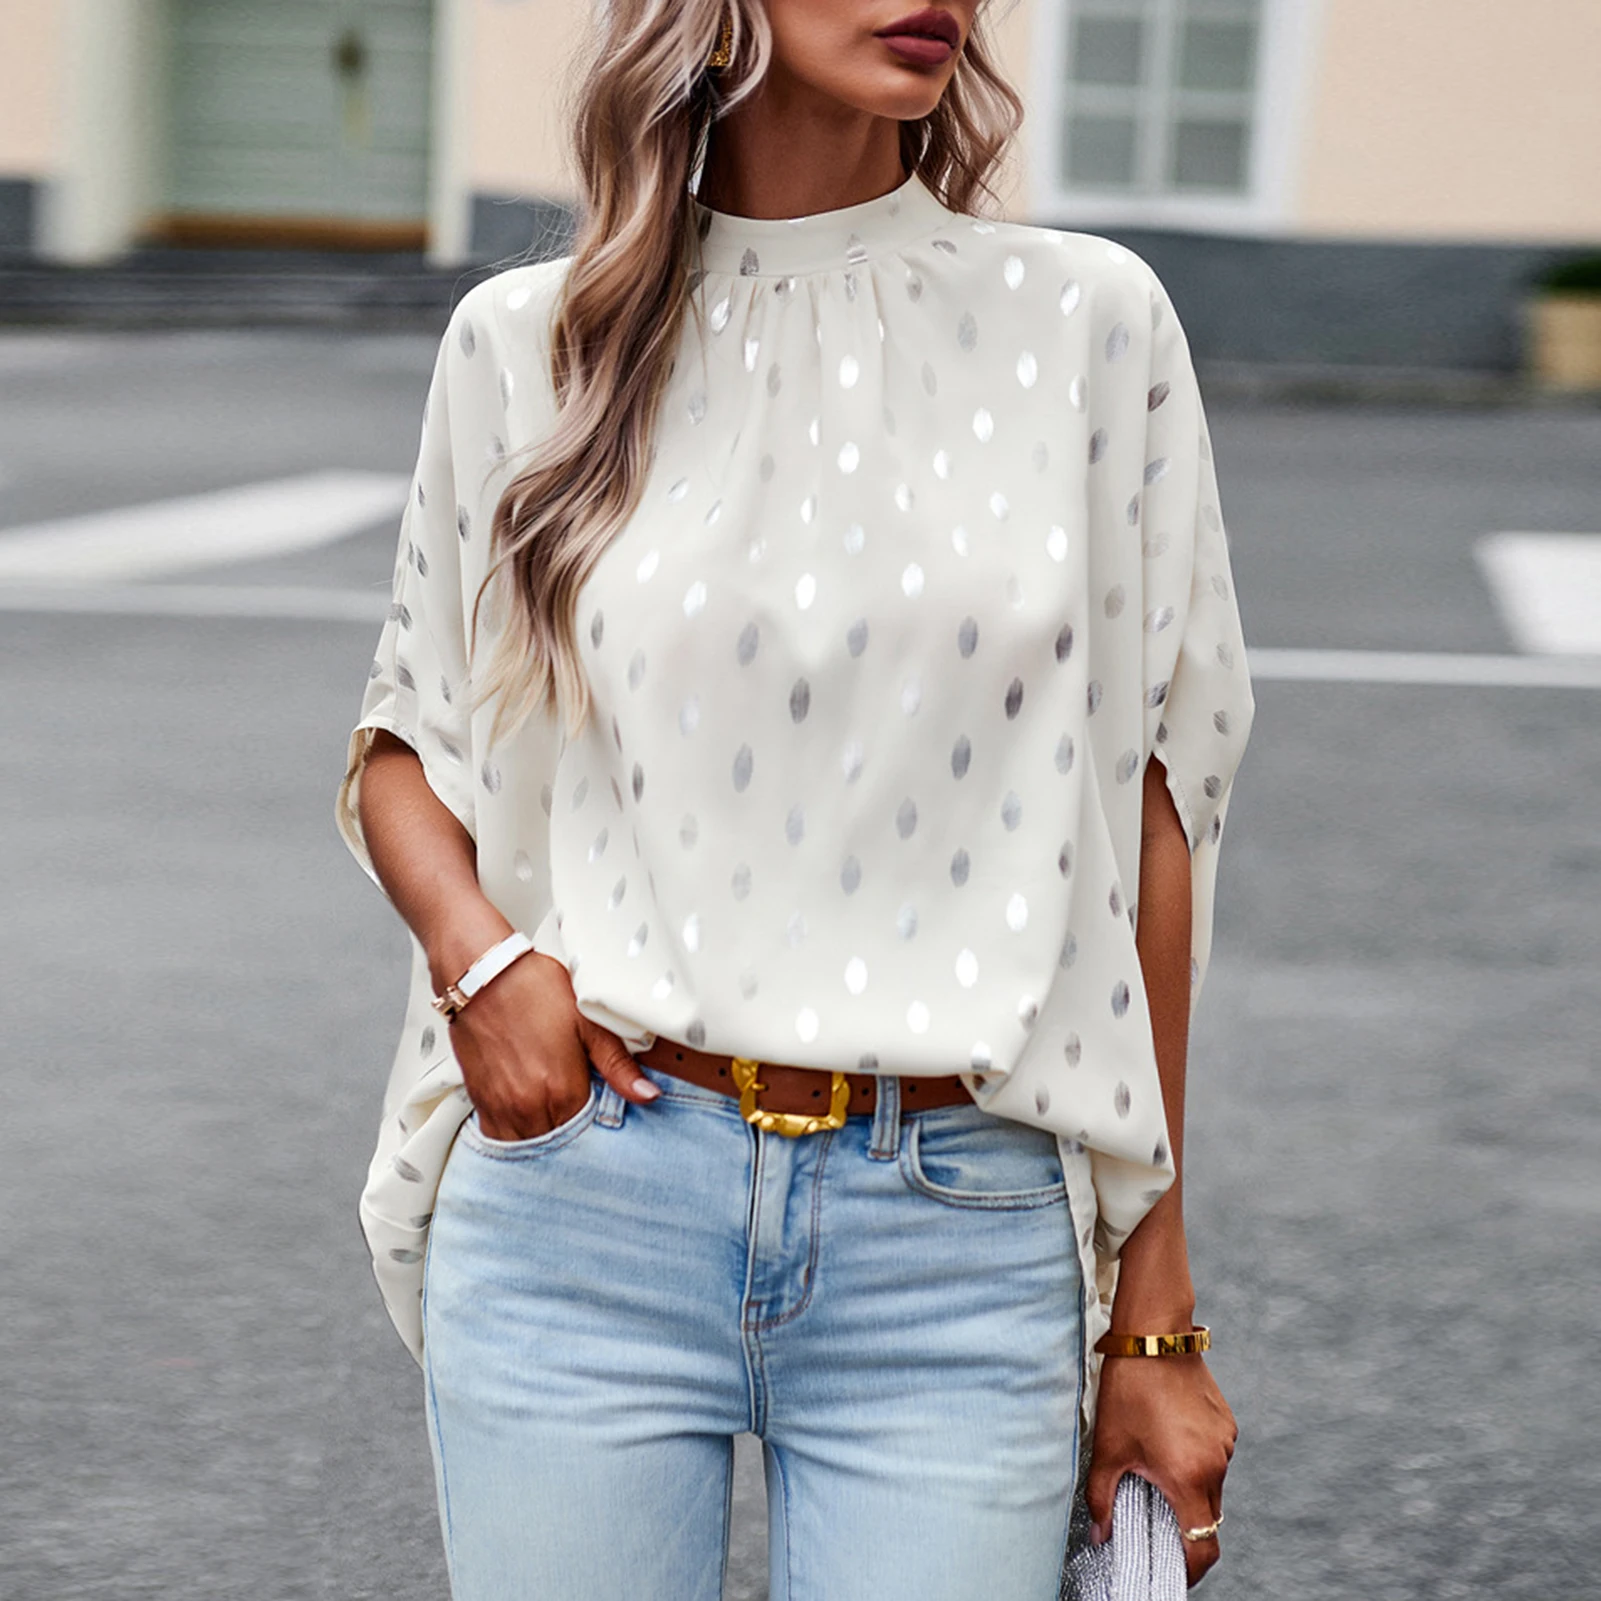 

Women Batwing Sleeve Top Elegant Casual T Shirts Fashion Polka Dots Blouse Pullover Chic Ladies Shirt Vacation Weekend Tops